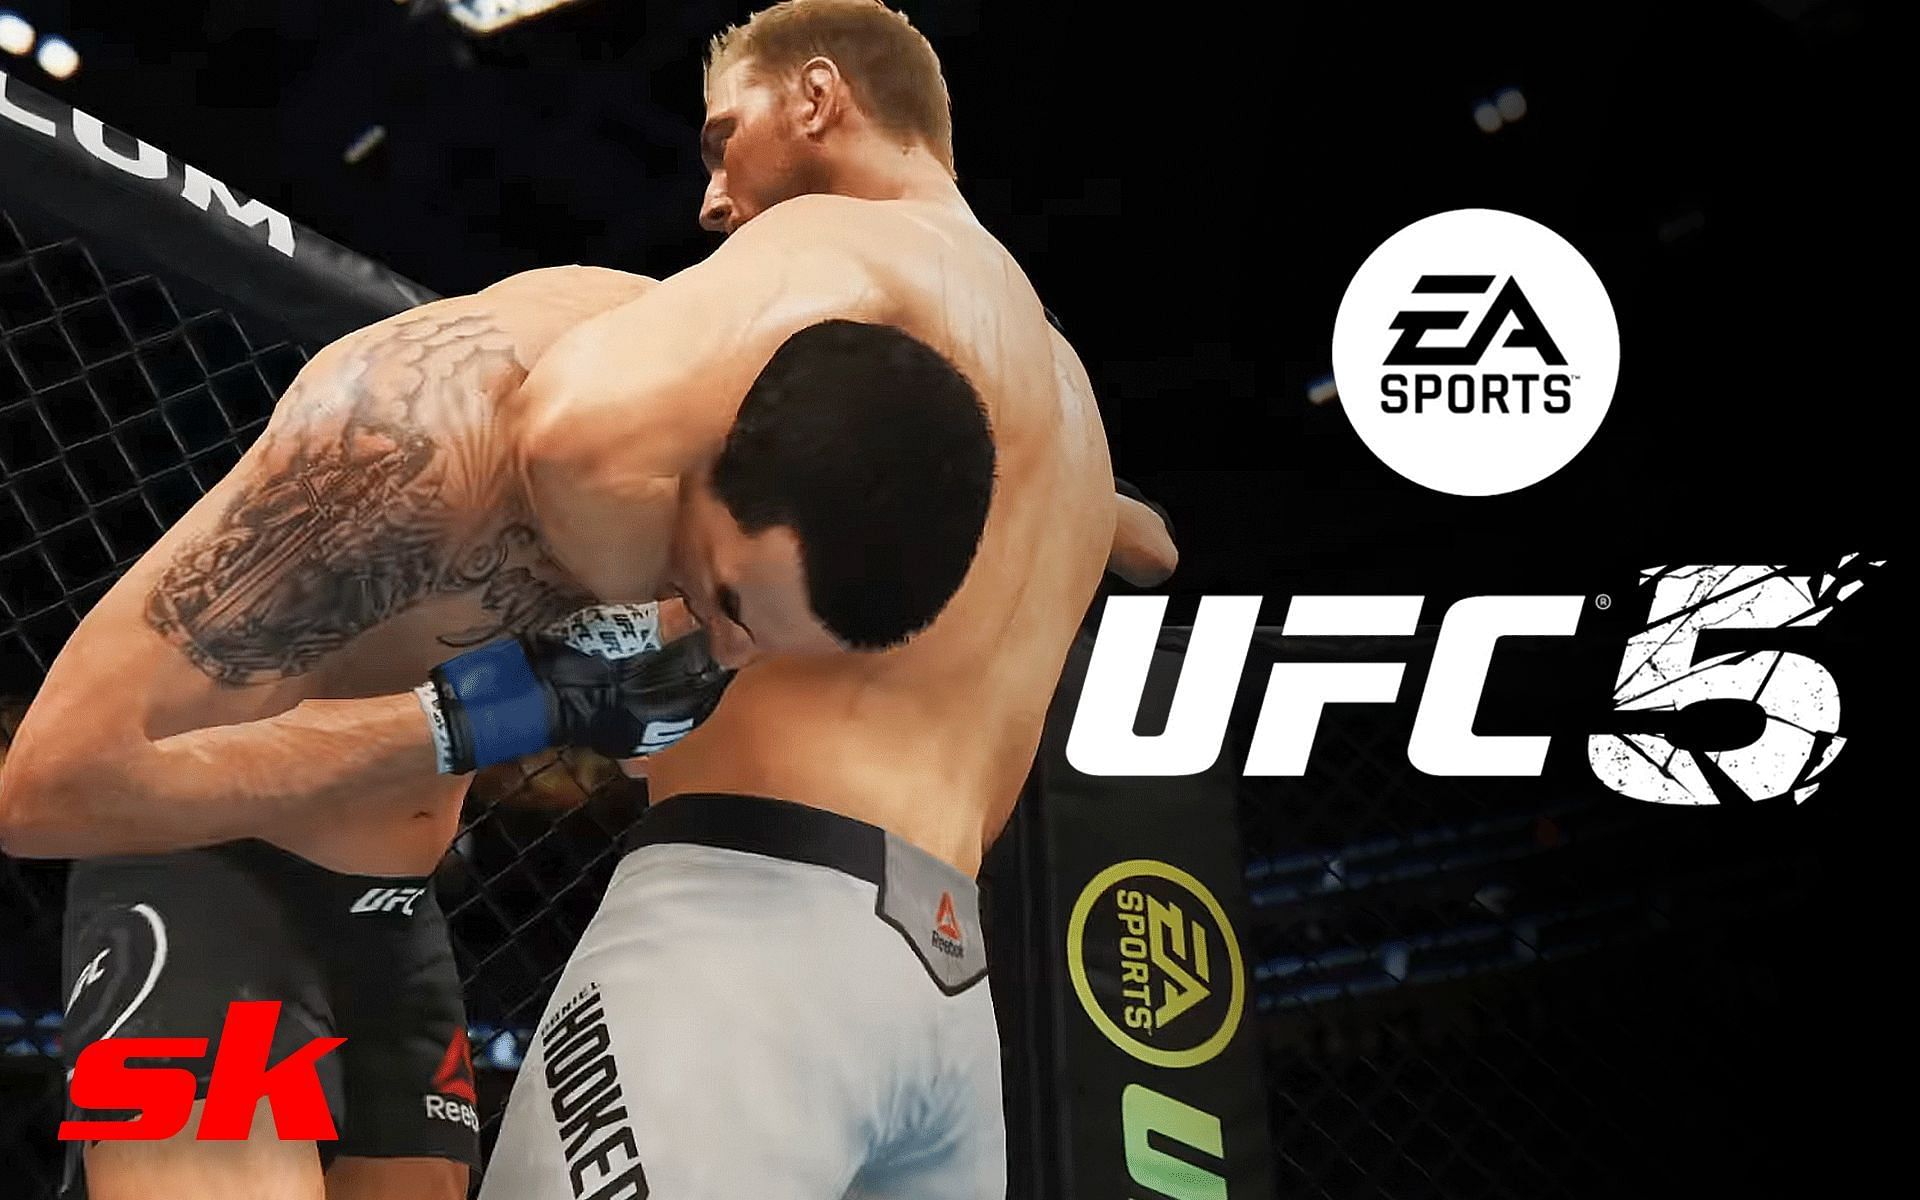 Screenshot from a previous EA Sports UFC video game (Left); EA Sports UFC 5 logo (Right) [*Image courtesy: EA Sports YouTube; @Dexerto Twitter]